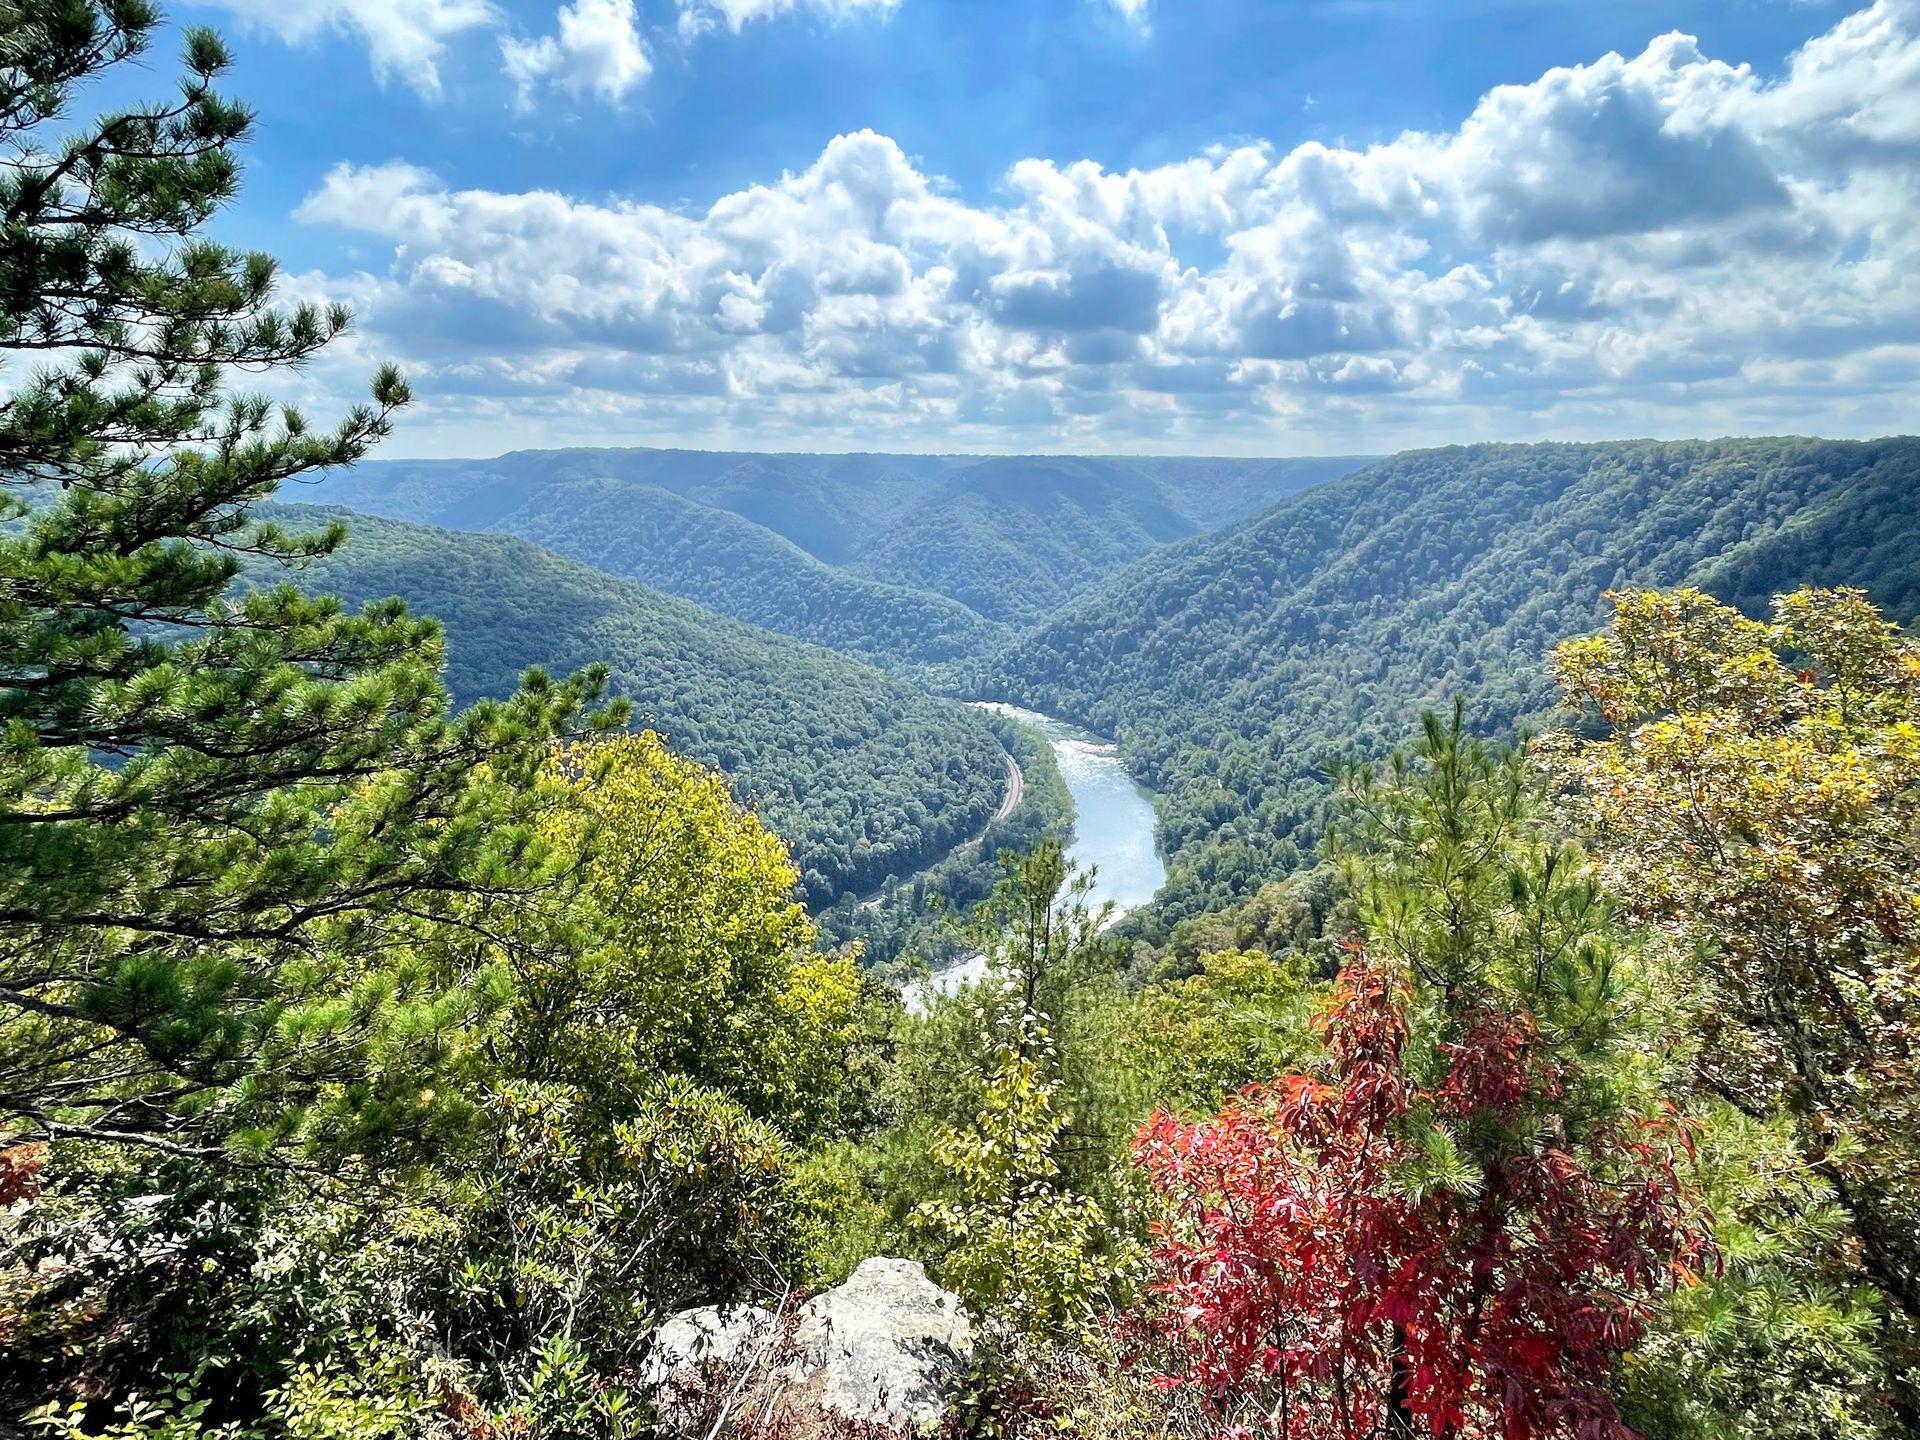 A river curving through a valley of trees near New River Gorge National Park.